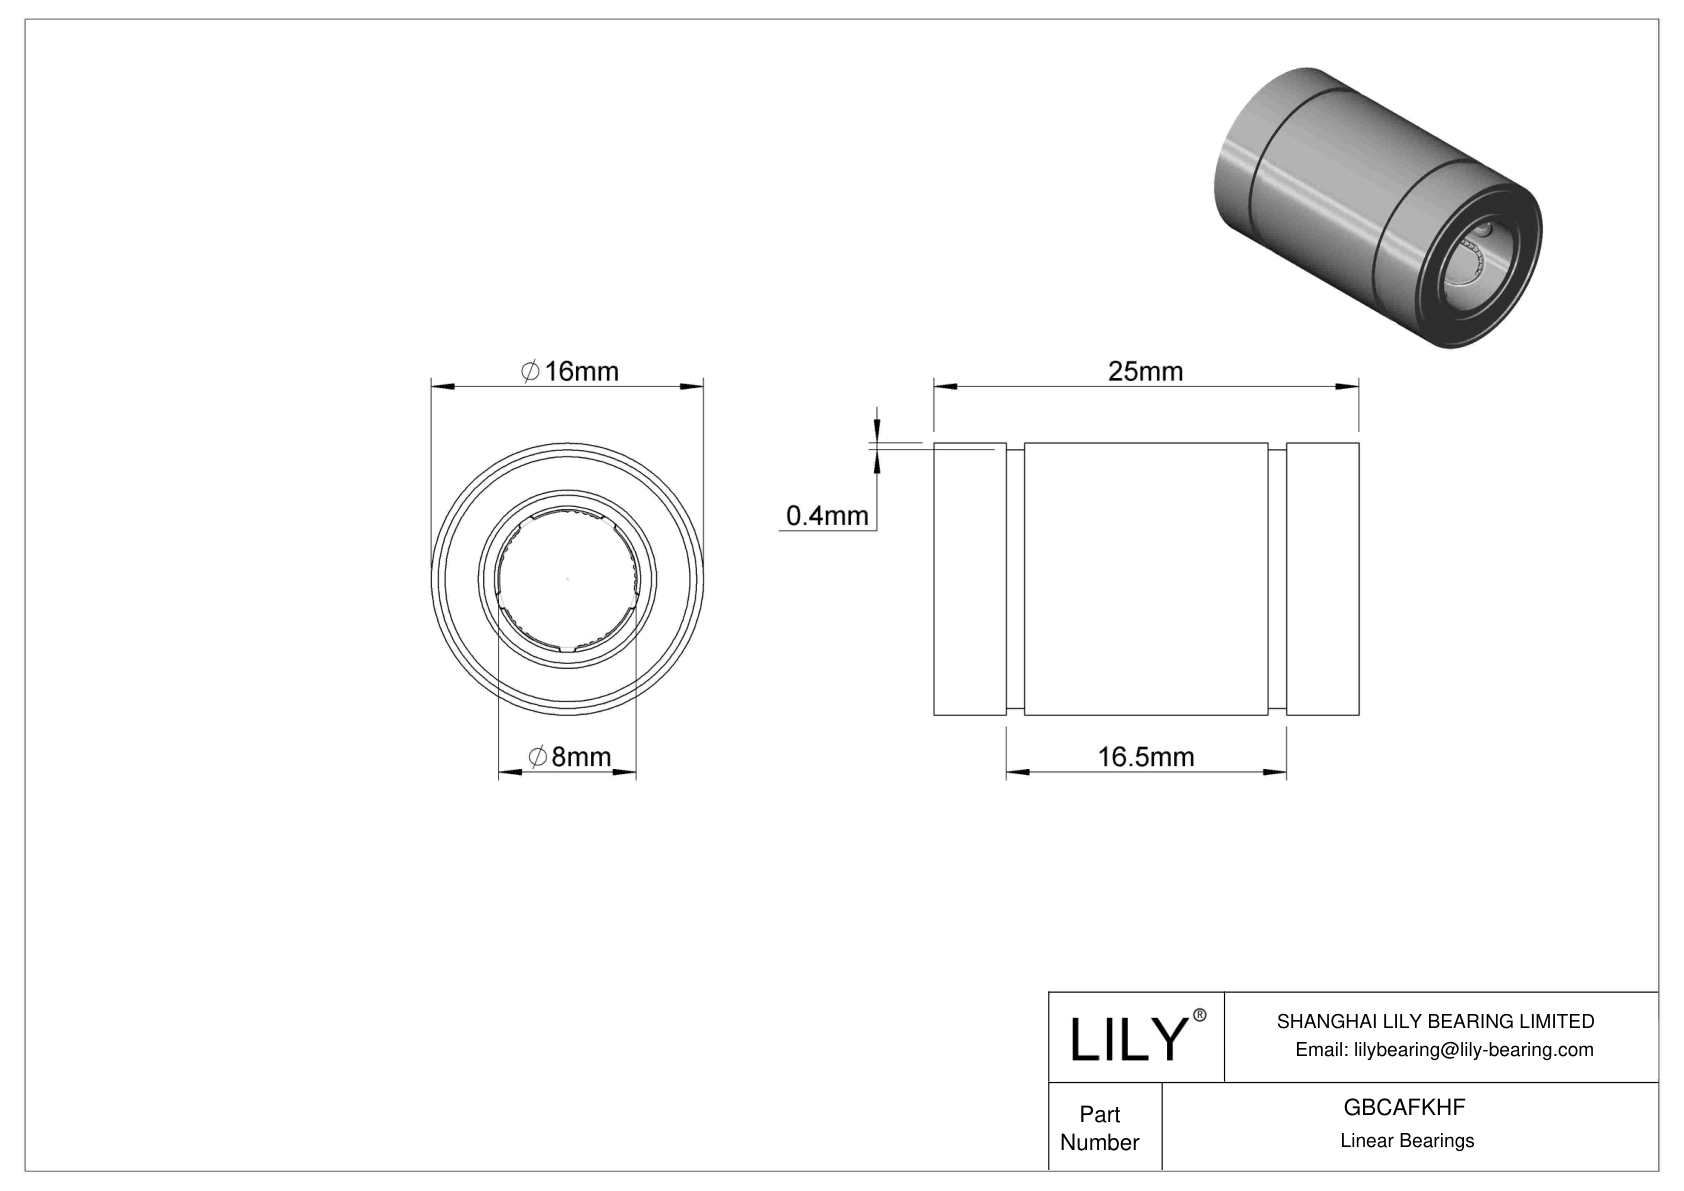 GBCAFKHF Common Linear Ball Bearings cad drawing